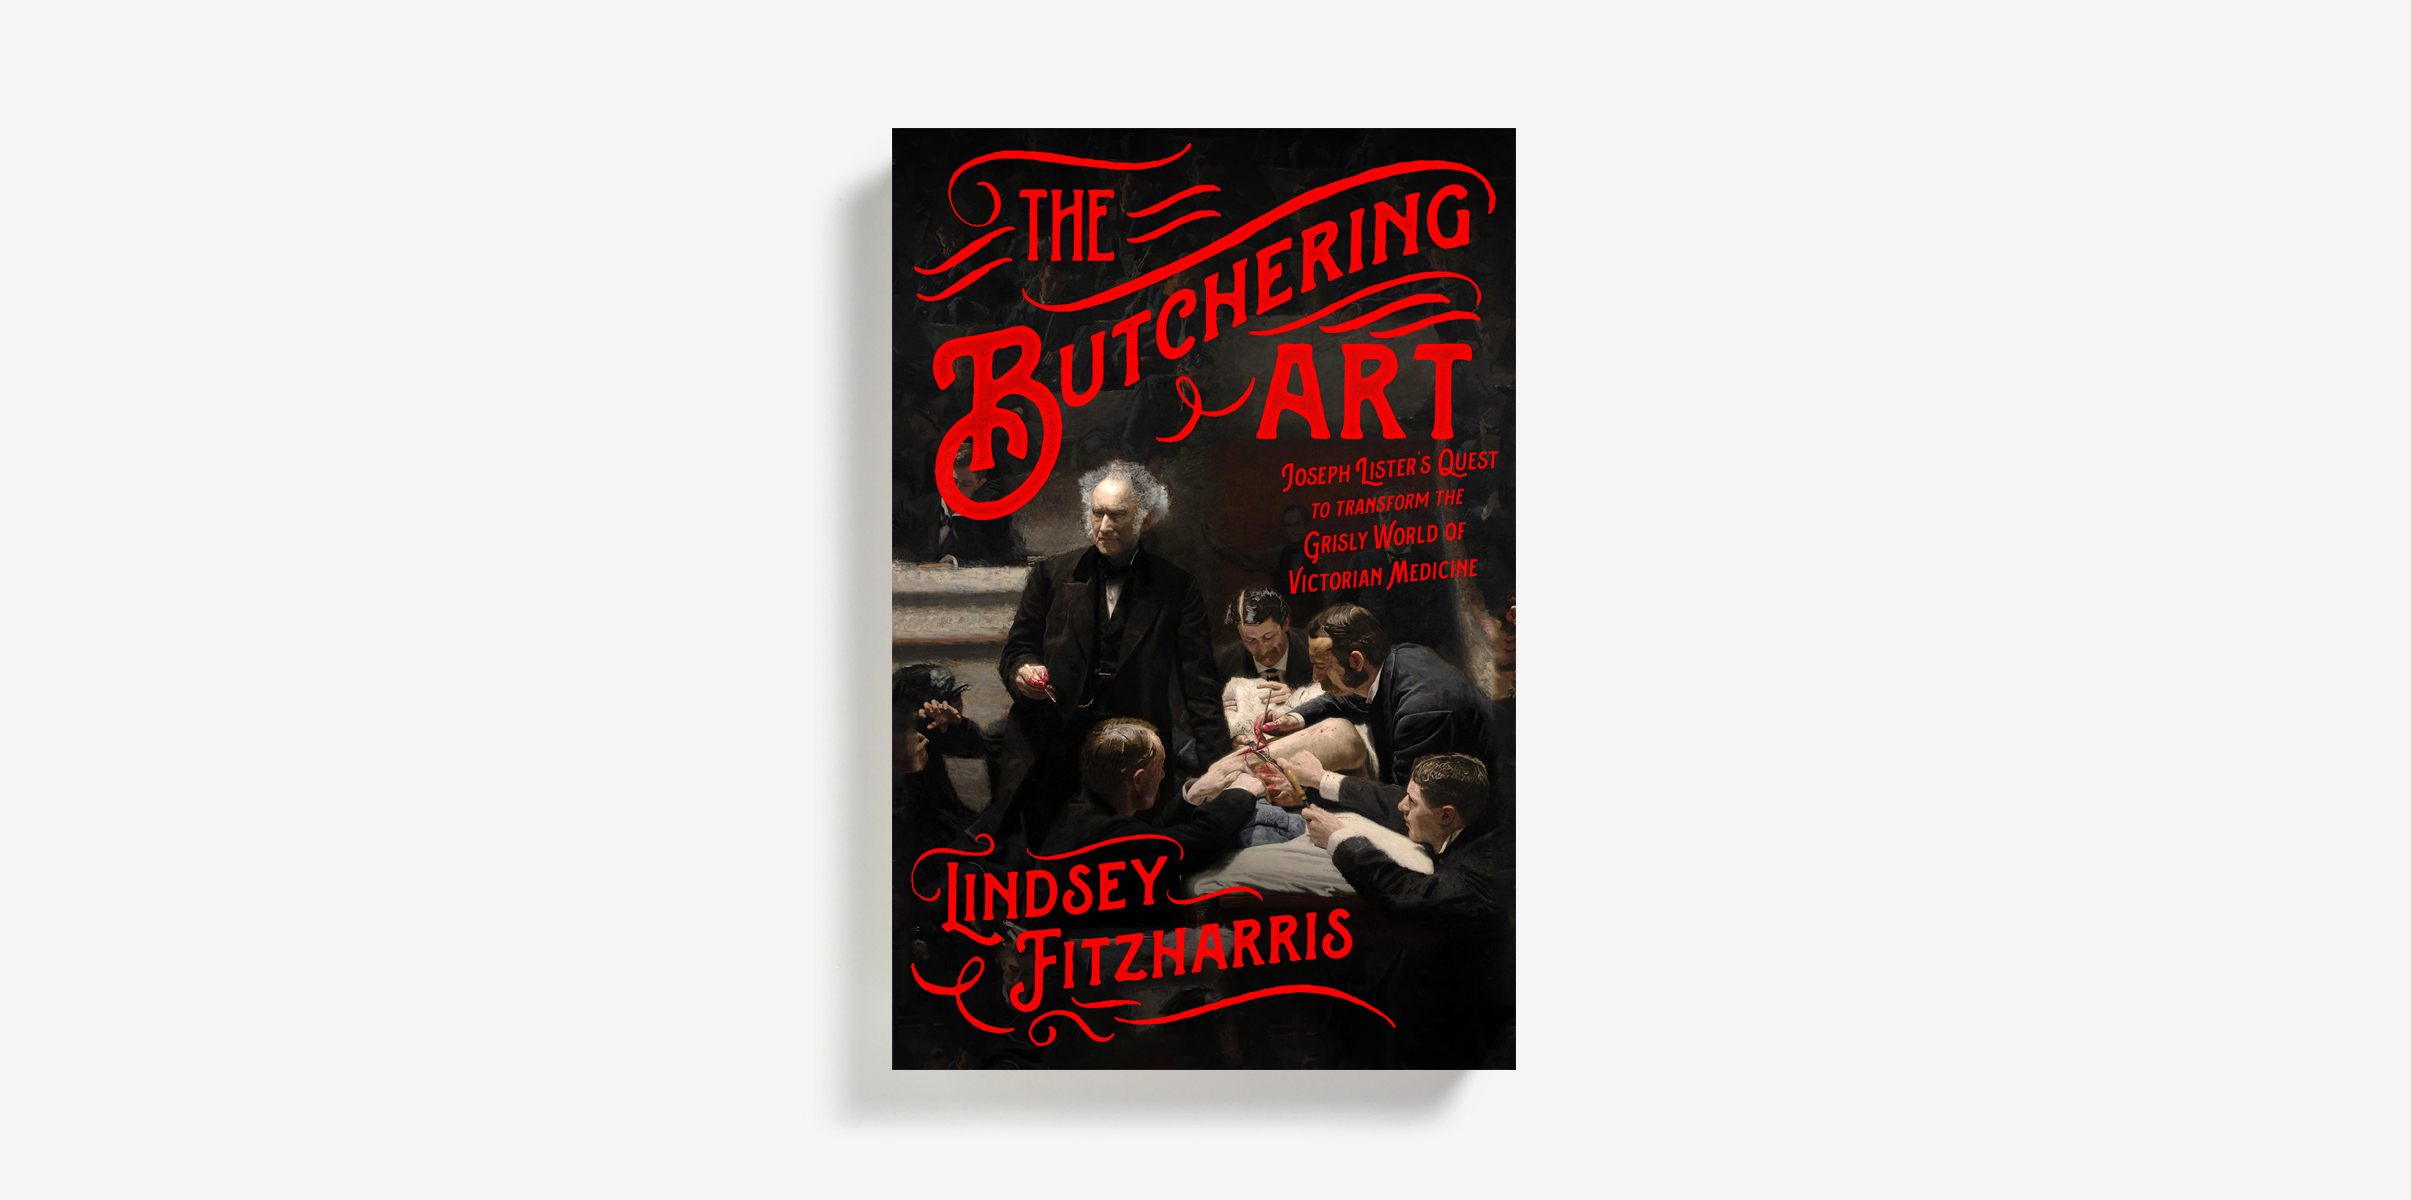 The Butchering Art by Lindsey Fitzharris